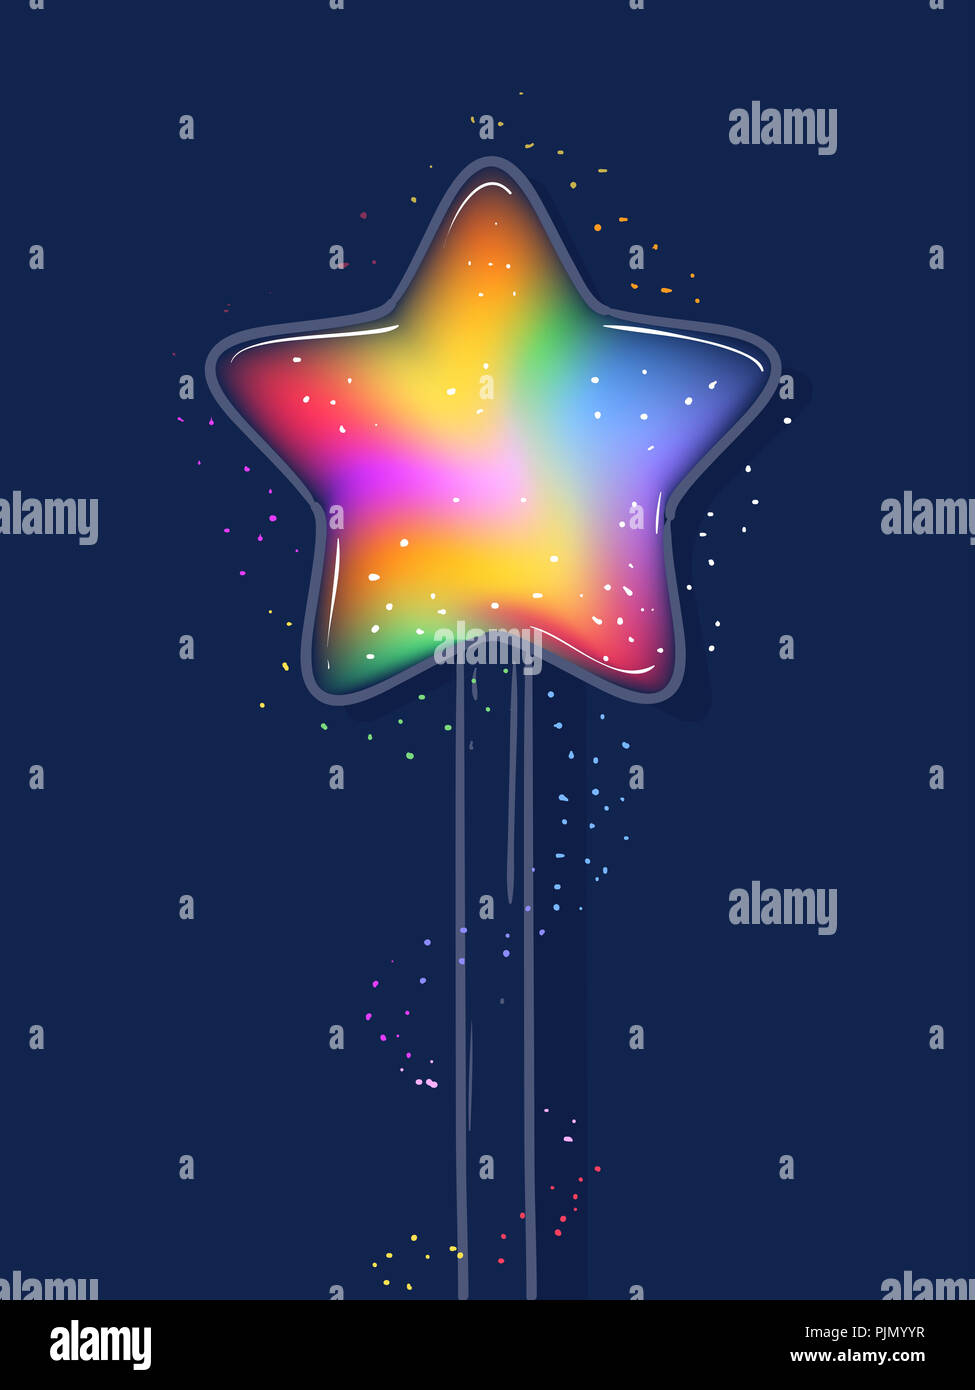 Fantasy Illustration of a Magic Wand with Rainbow Colors Inside Stock Photo